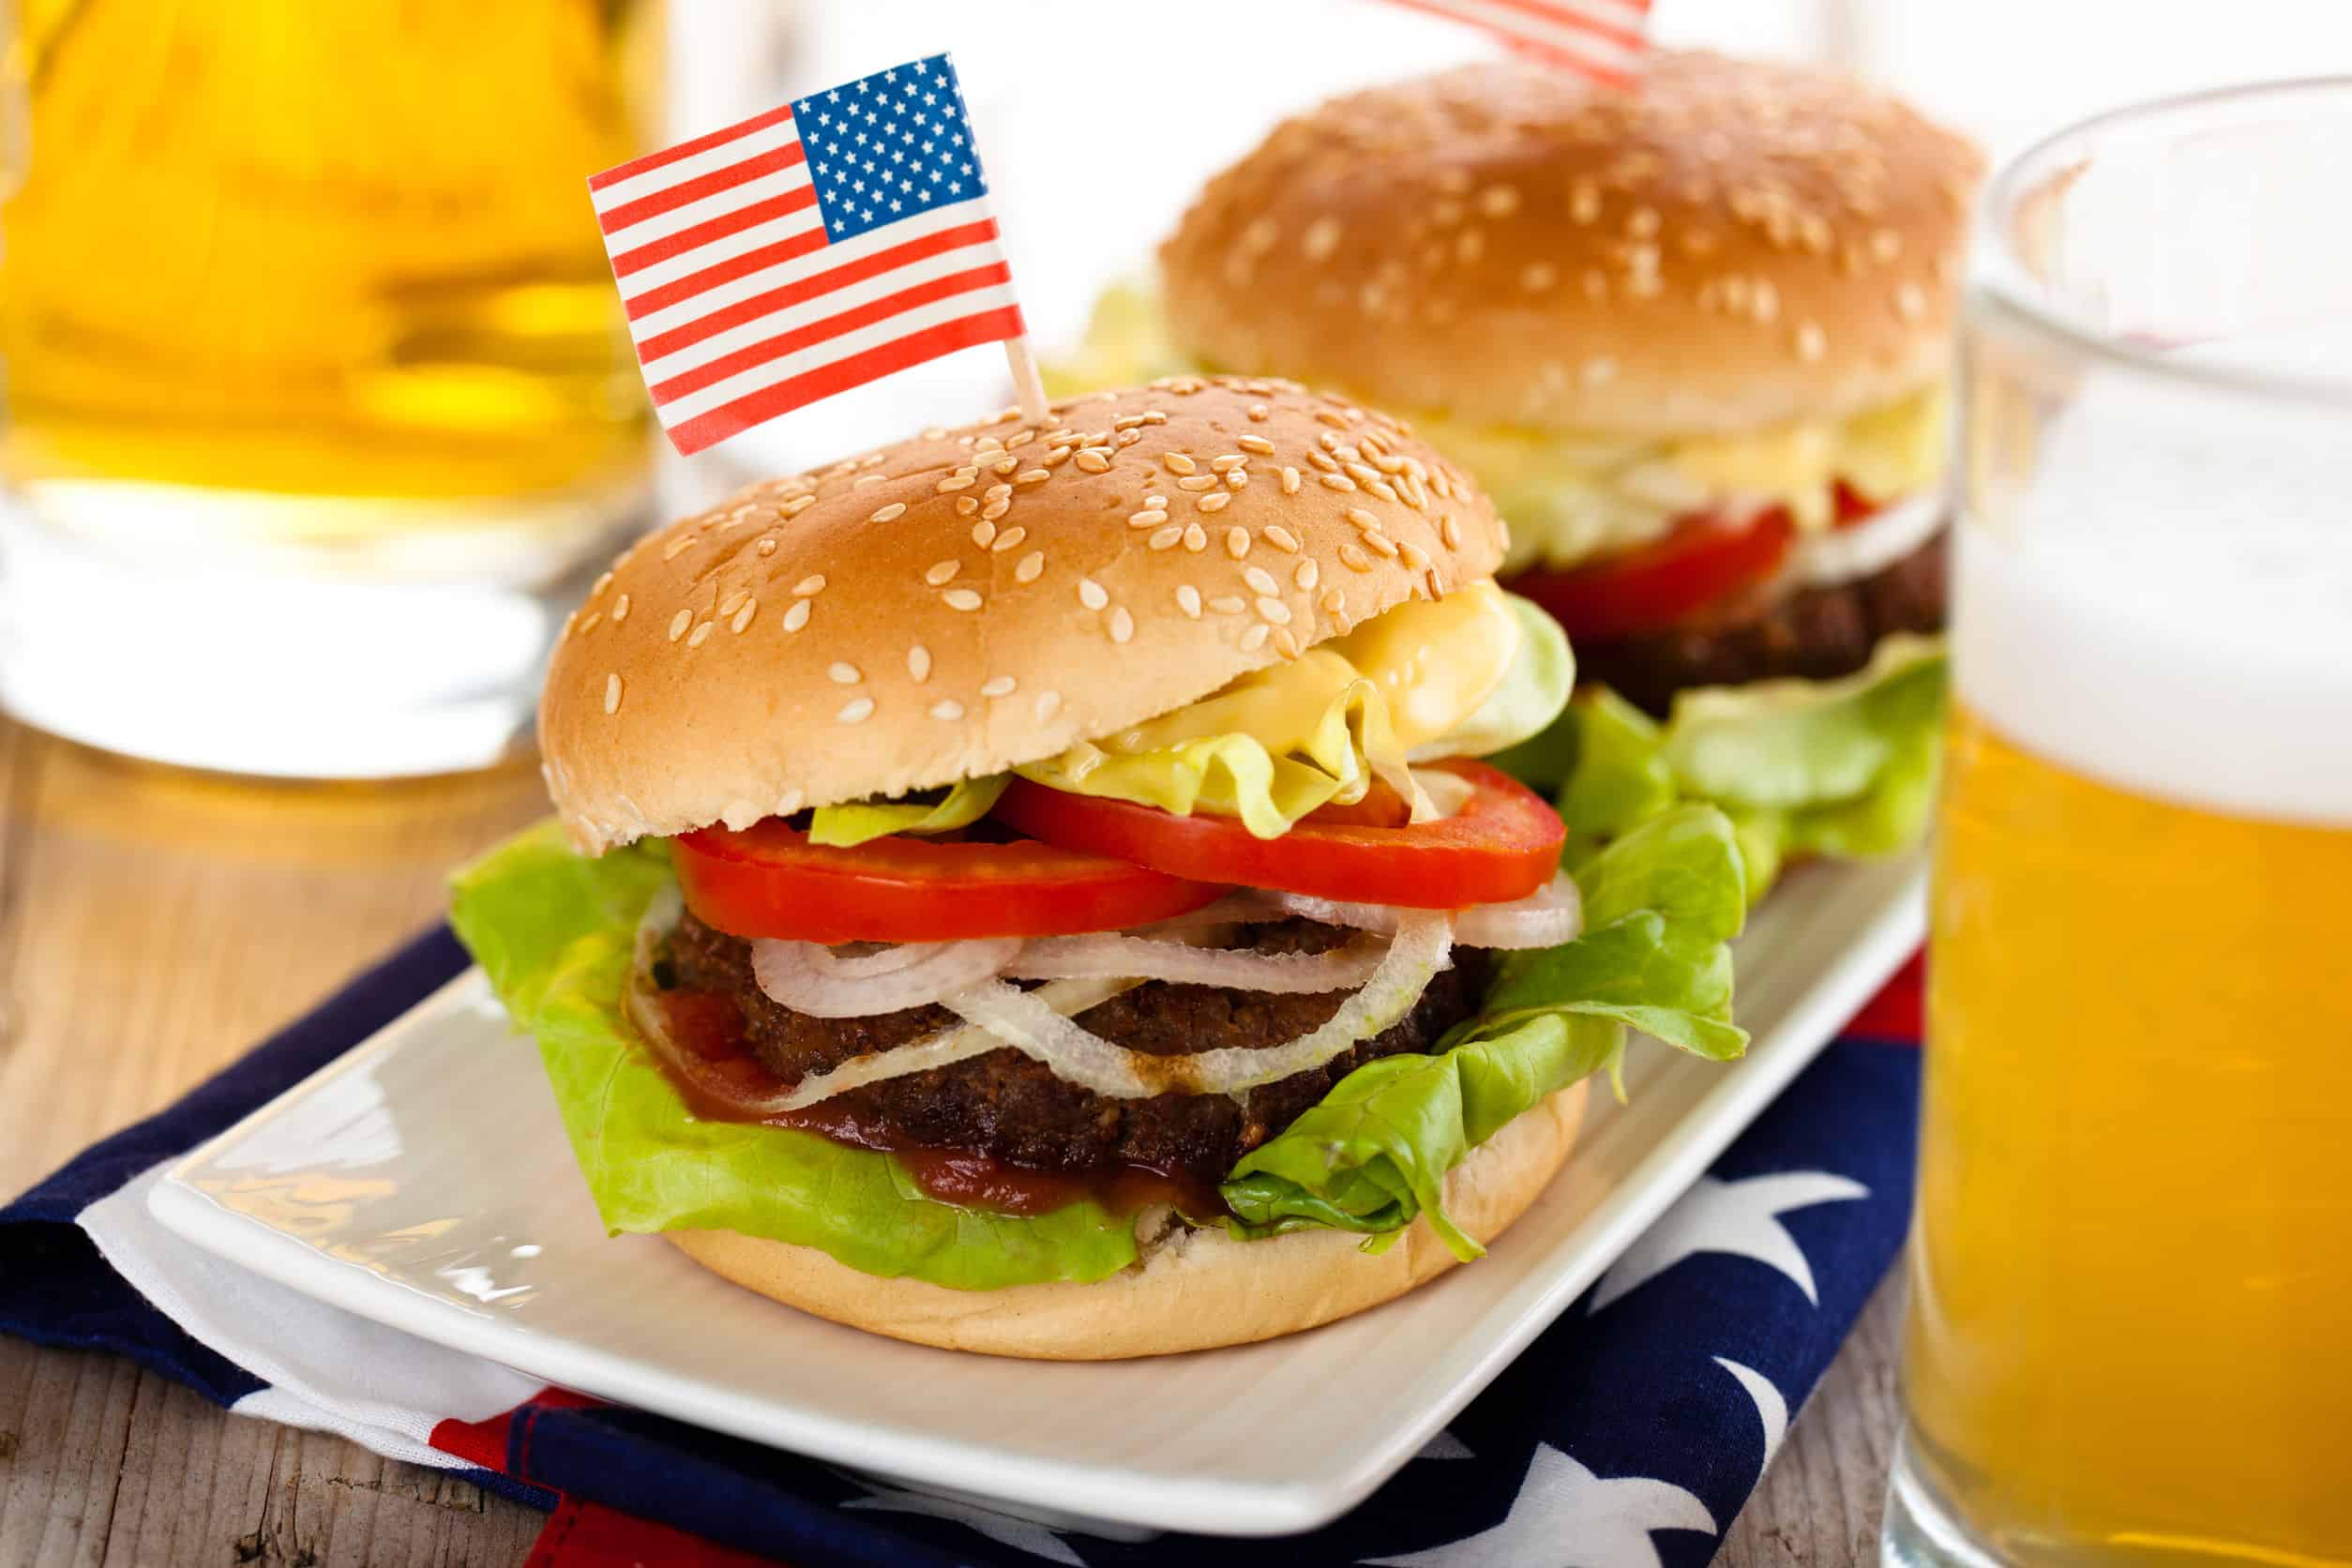 Attending a 4th of July BBQ? How Coloradans Can Avoid Getting a DUI